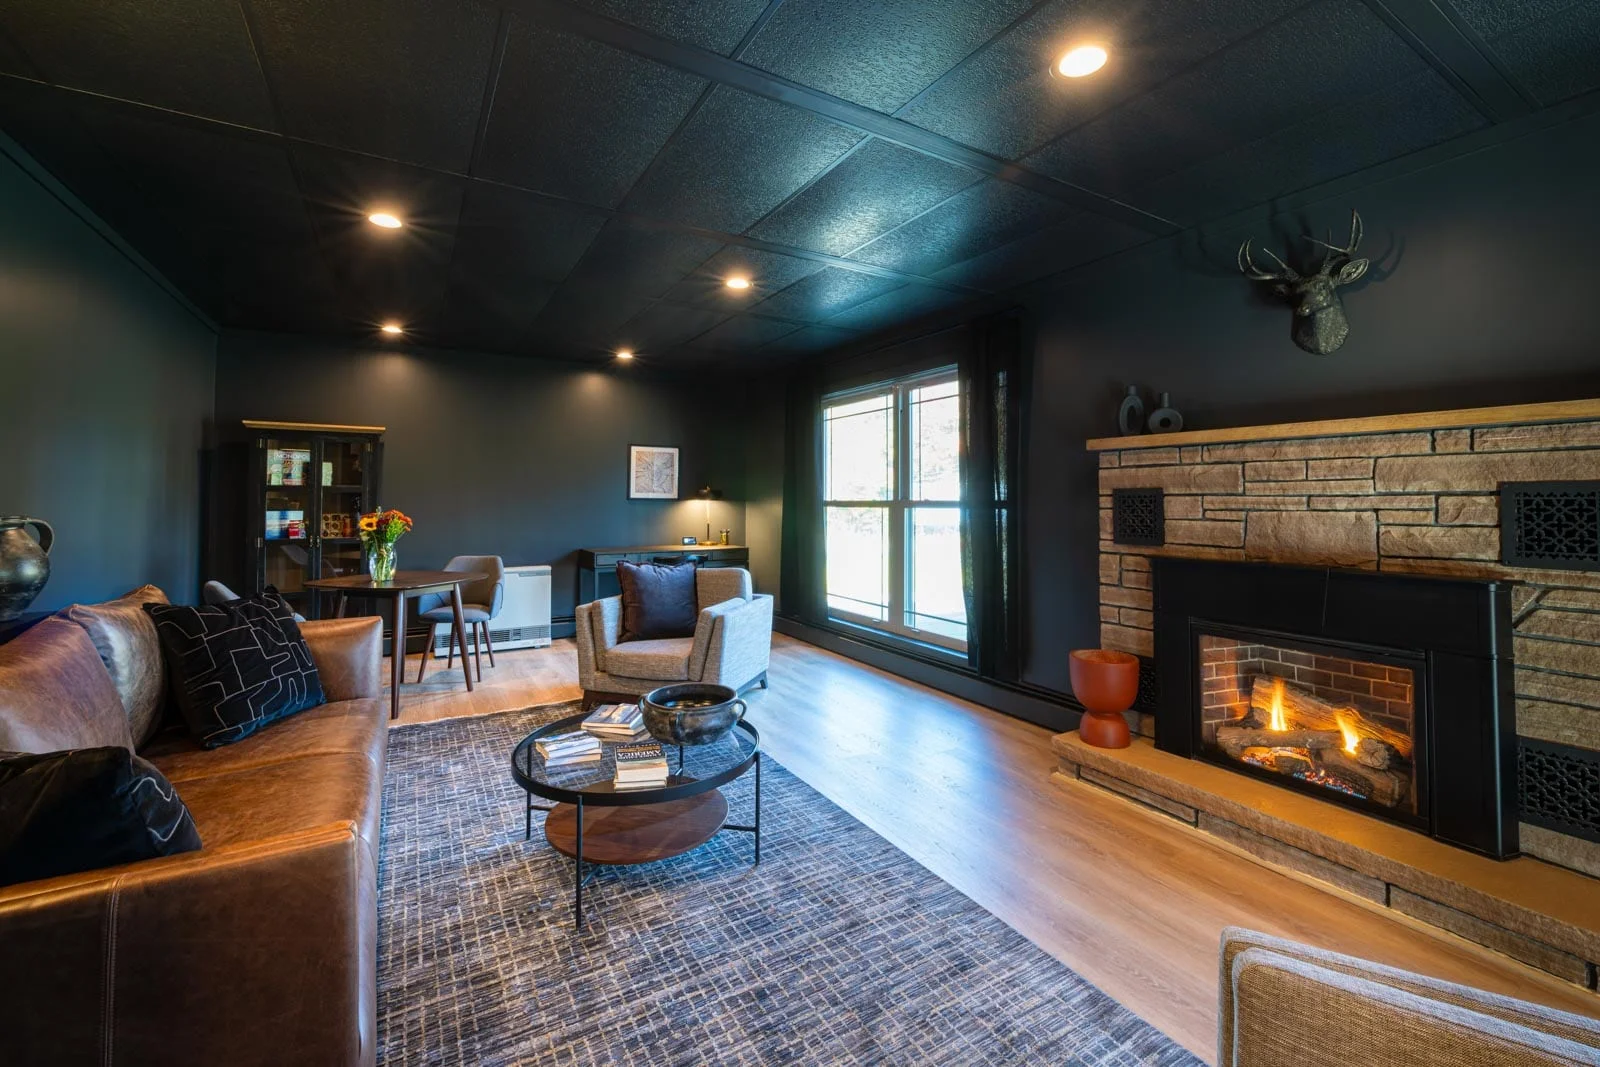 A living room with black walls and a fireplace.